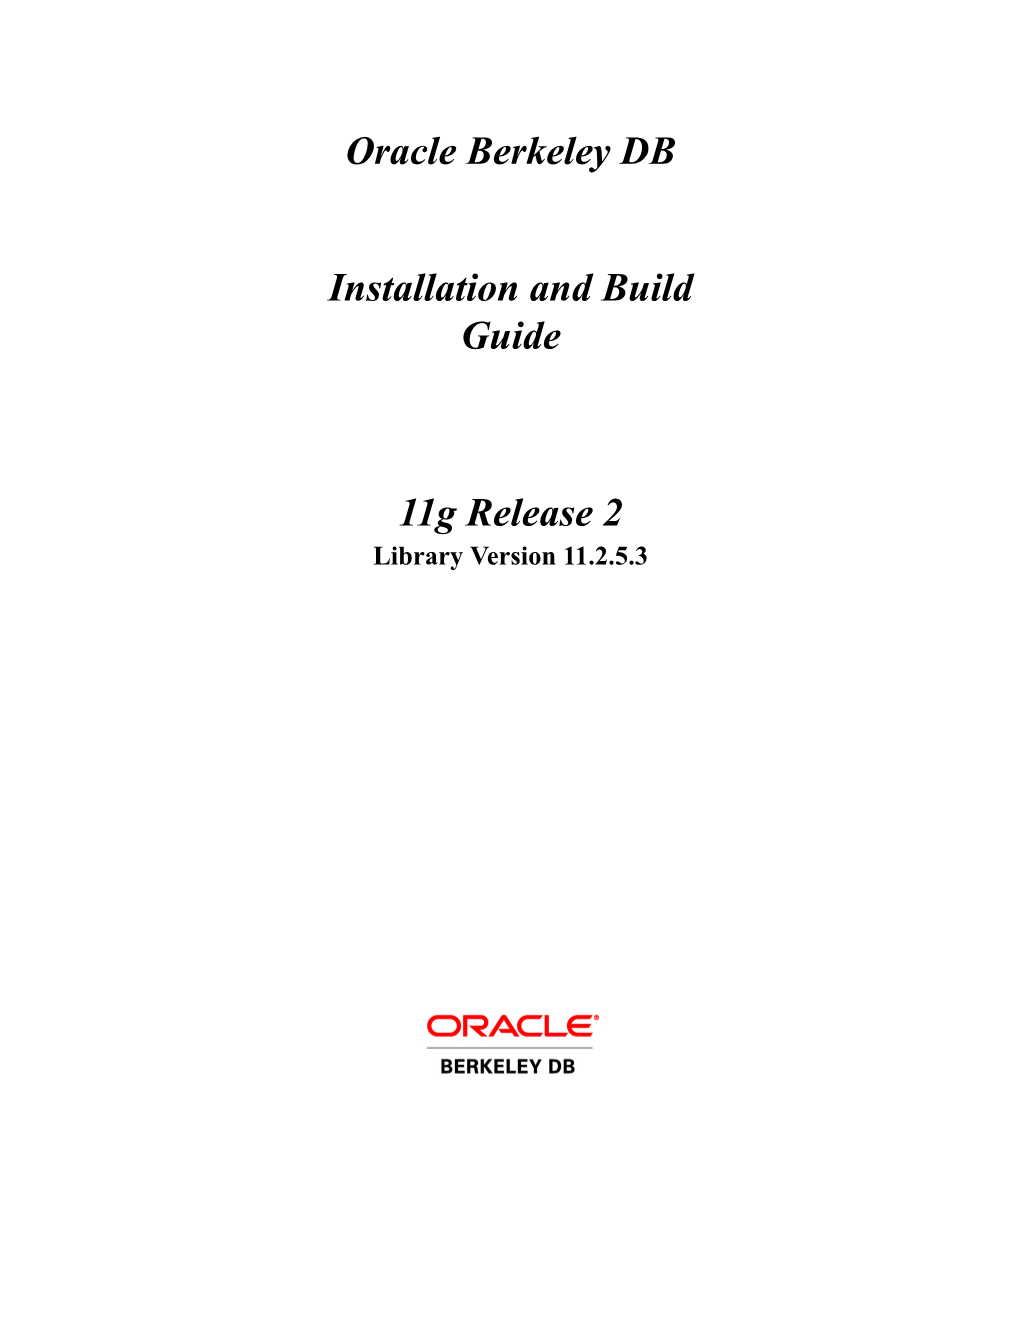 Oracle Berkeley DB Installation and Build Guide 11G Release 2